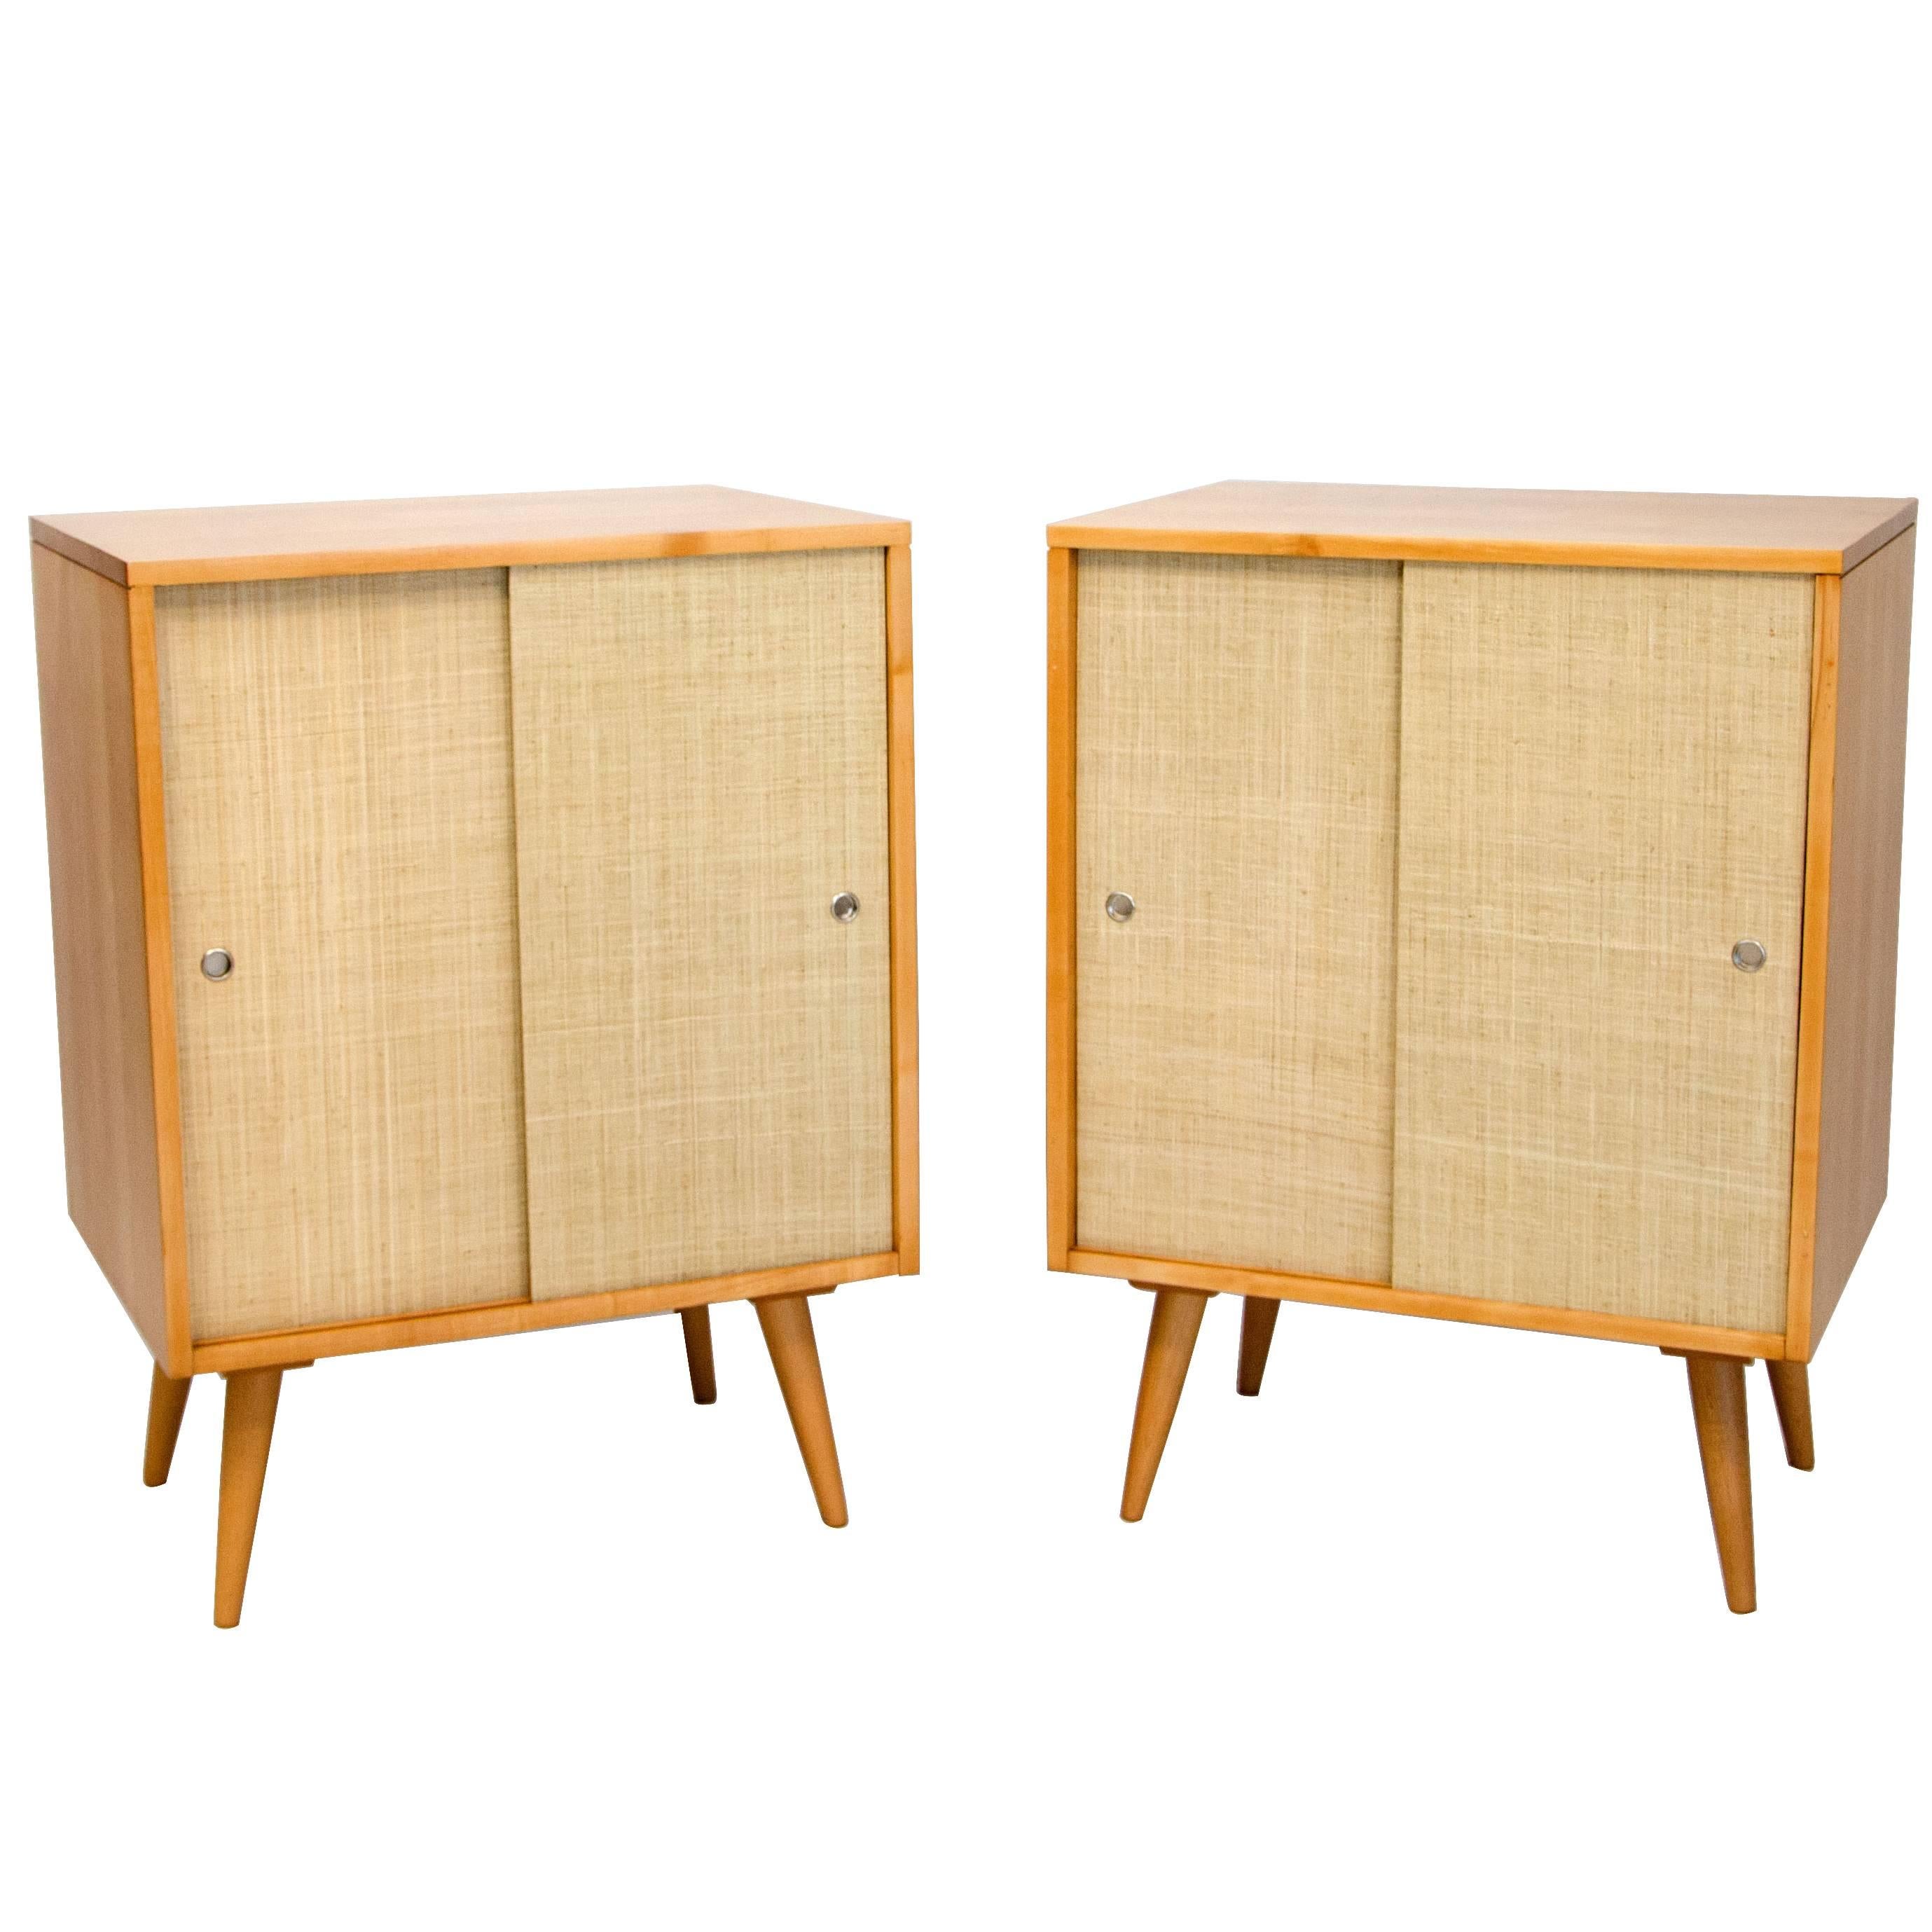 Pair of Storage Cabinets, Paul McCobb Planner Group